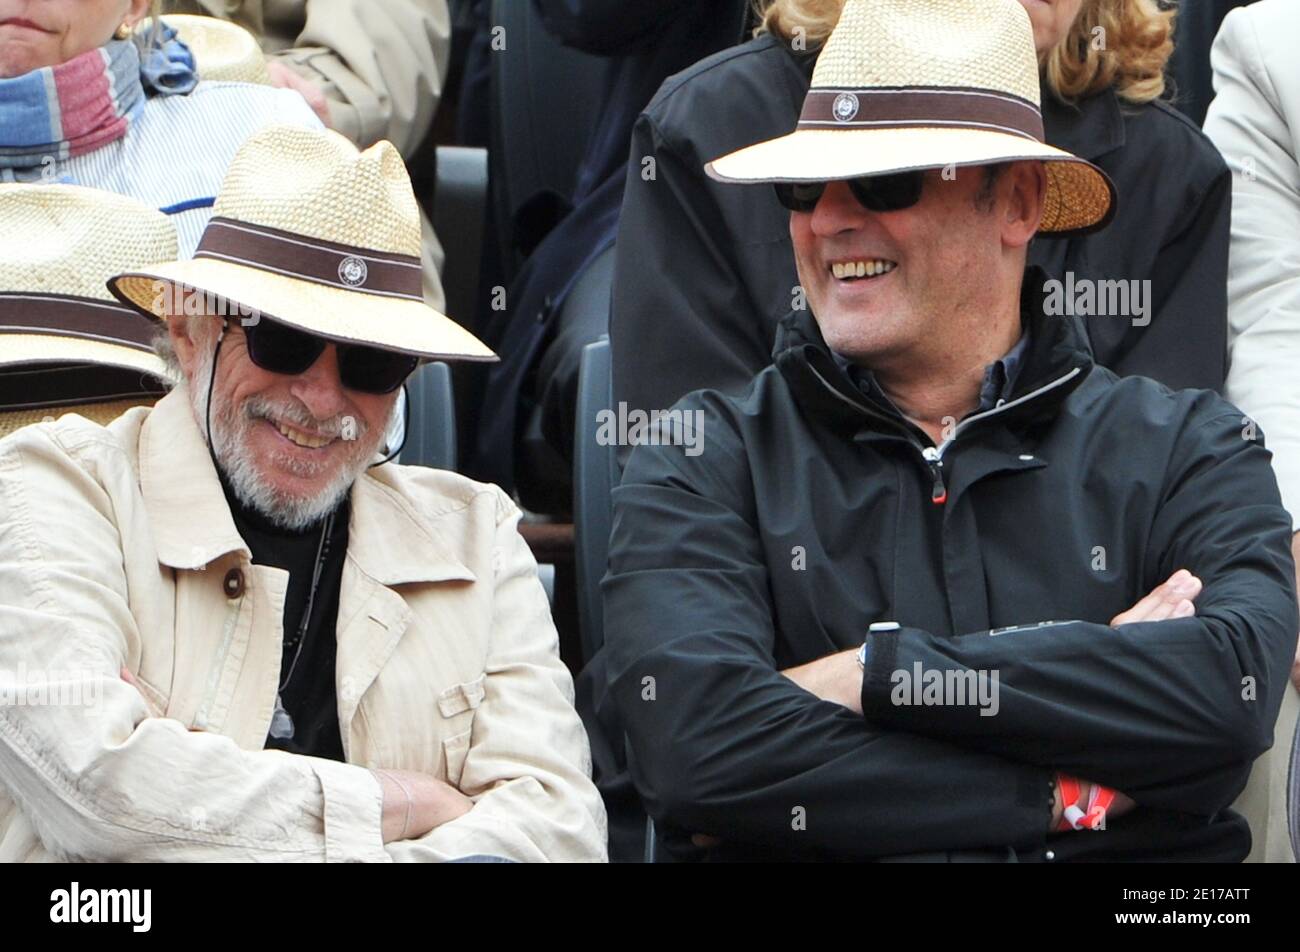 Necessities baggrund lavendel Pierre Richard, Jean Reno and his wife attending the French Tennis Open  2011 at Roland Garros arena in Paris, France on May 31, 2011. Photo  byChristophe Guibbaud/ABACAPRESS.COM Stock Photo - Alamy